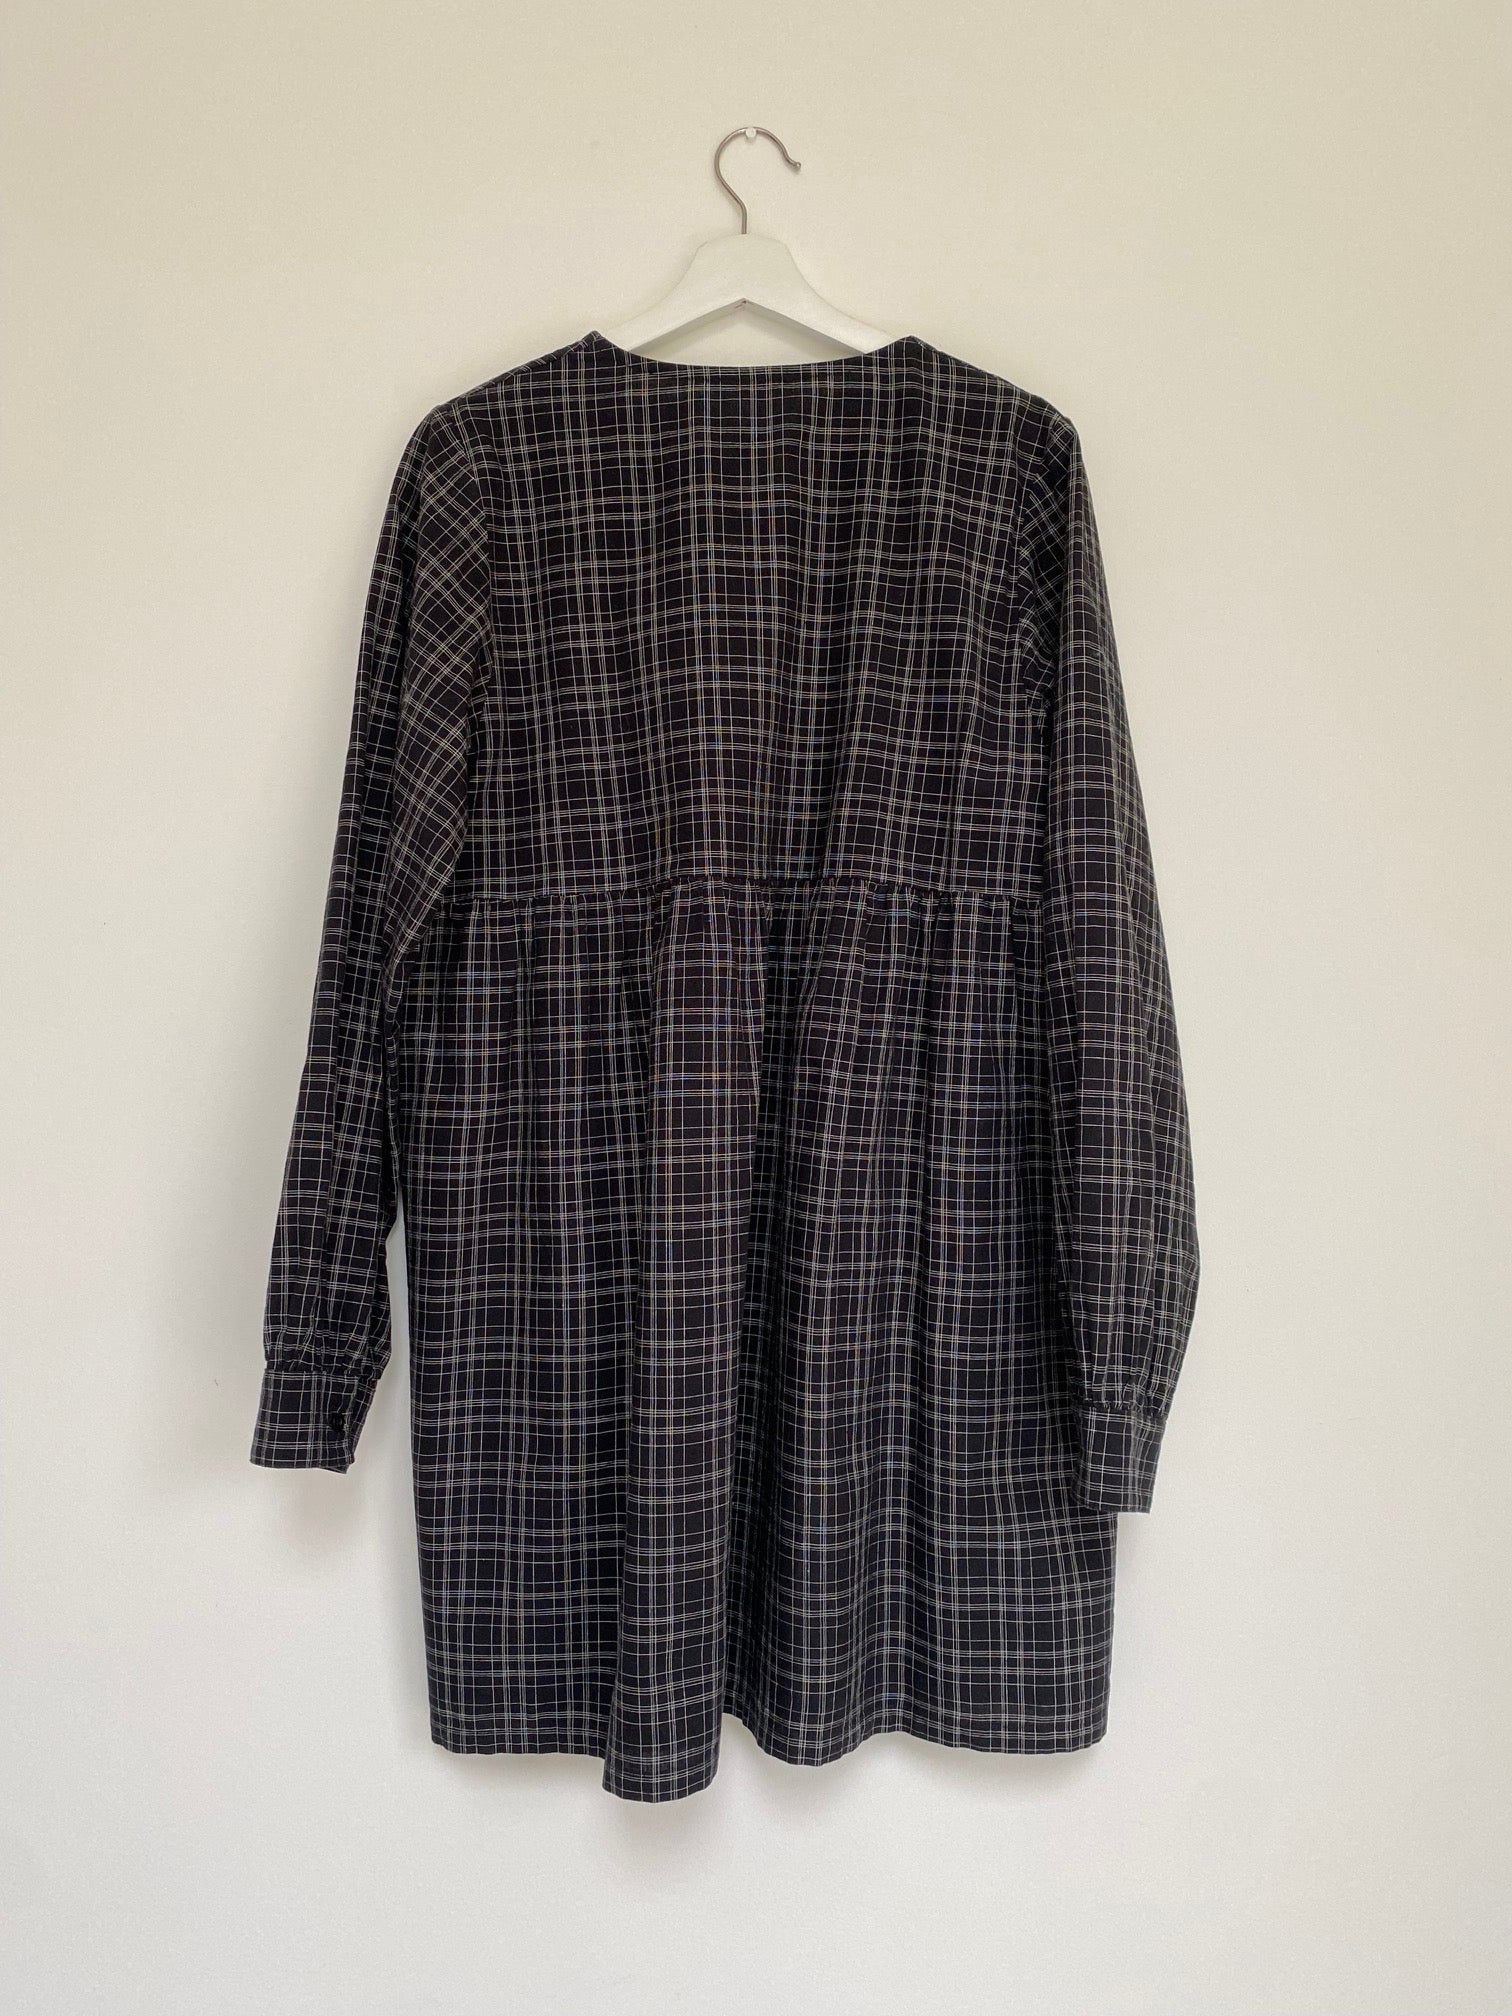 Eloise-Cay Dress in Black & White Check Size S